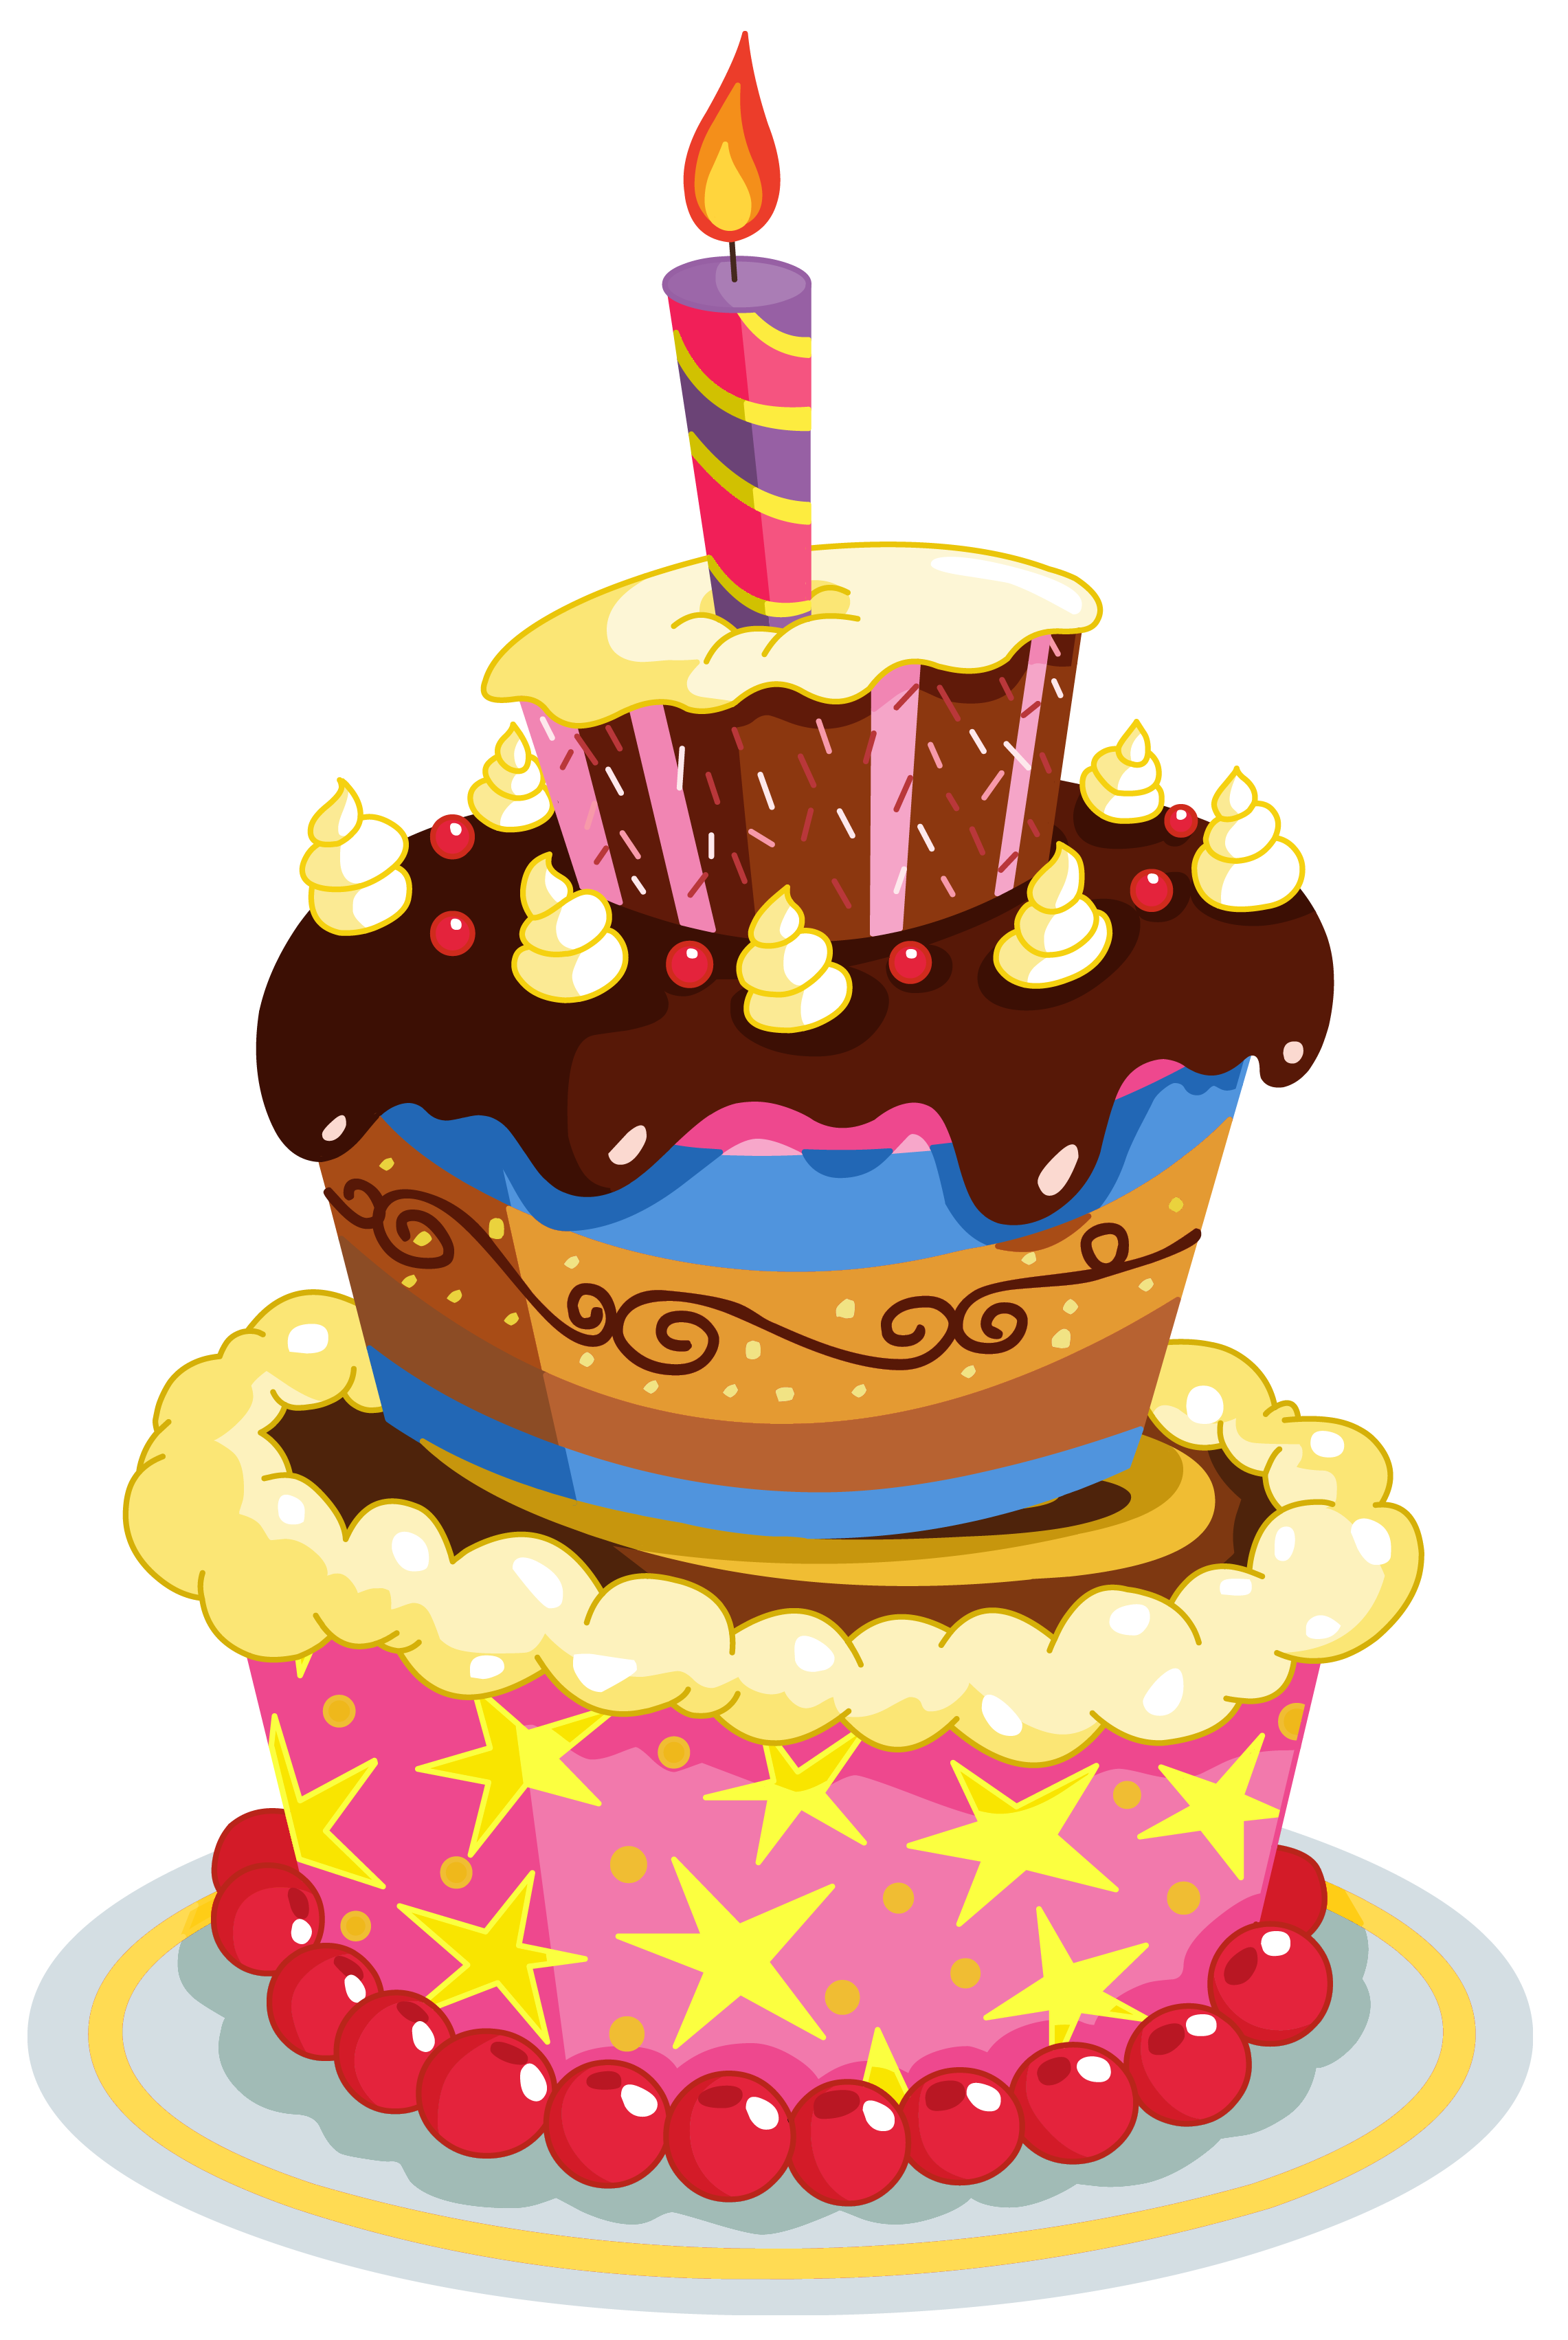 Cake Images Free Free Download Clip Art Free Clip Art On 